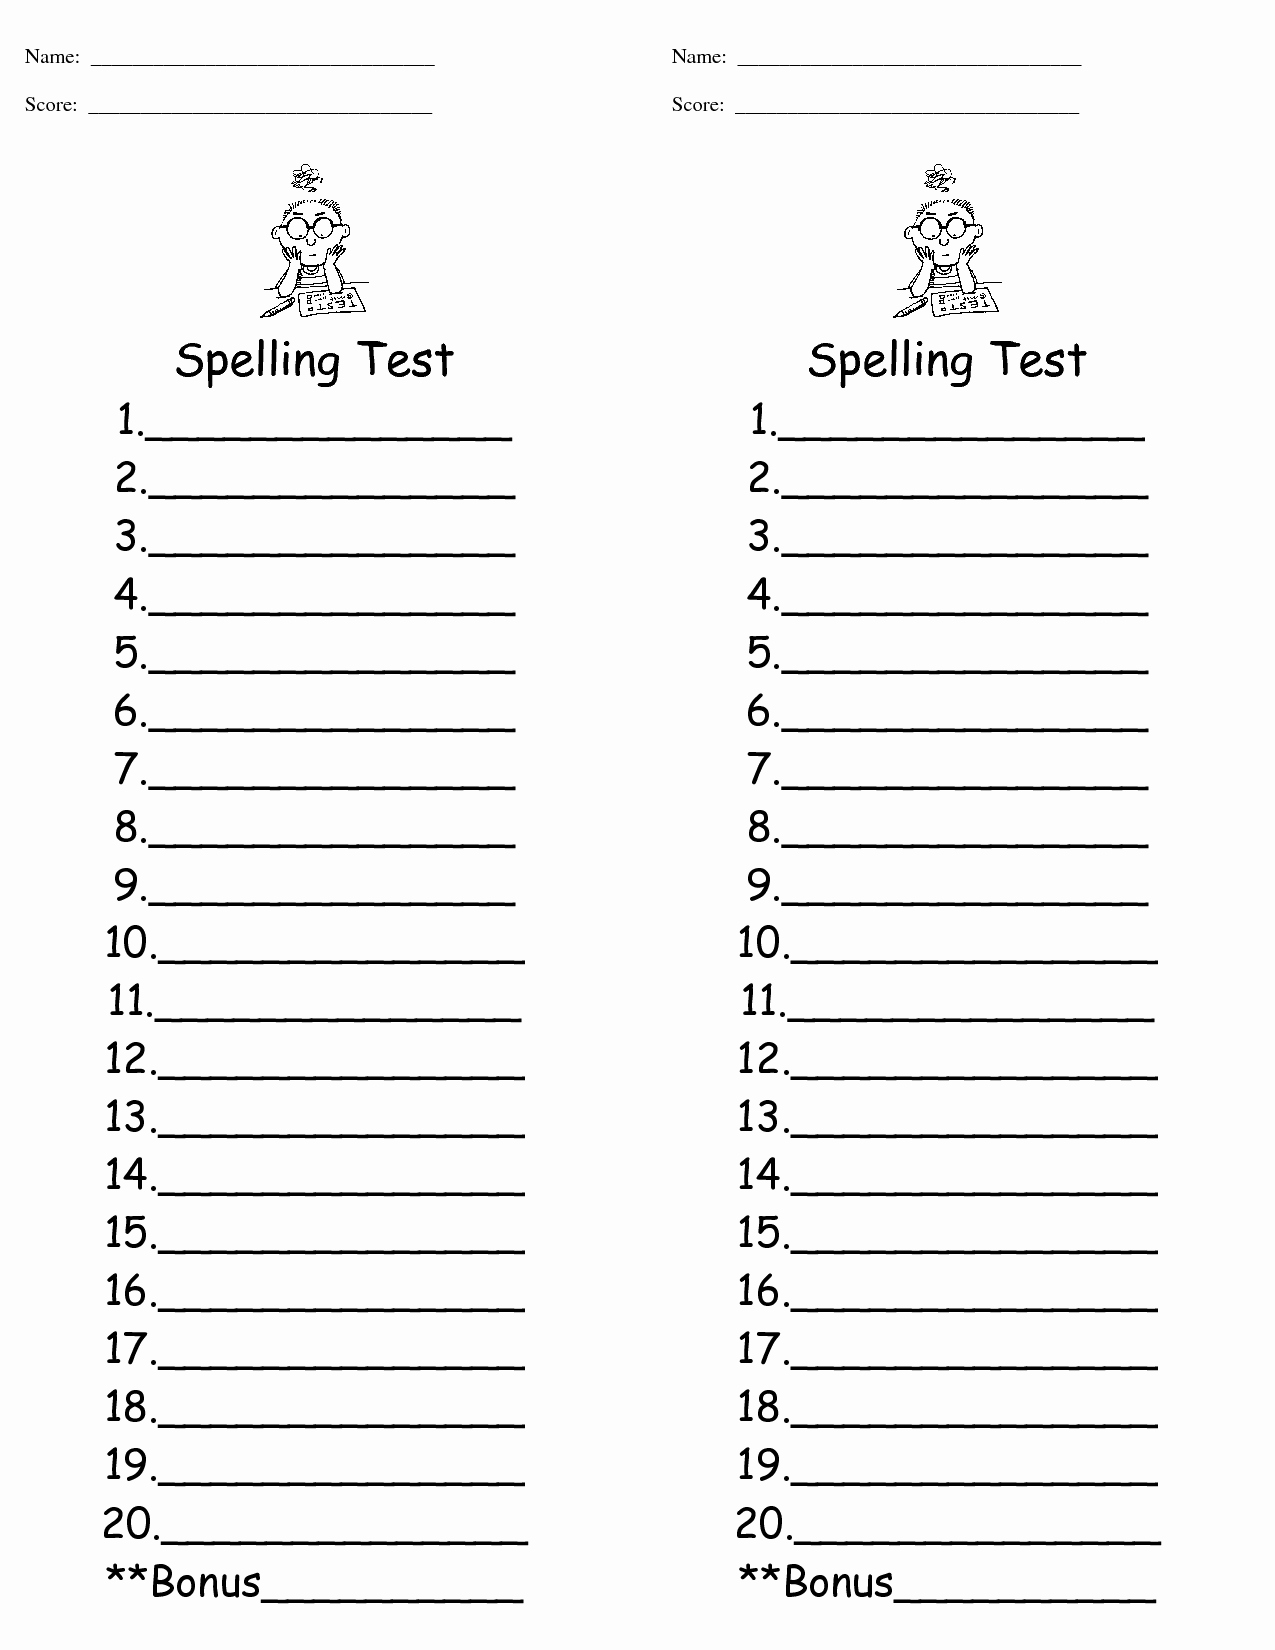 Blank Spelling Practice Worksheets Awesome Spelling Test Template